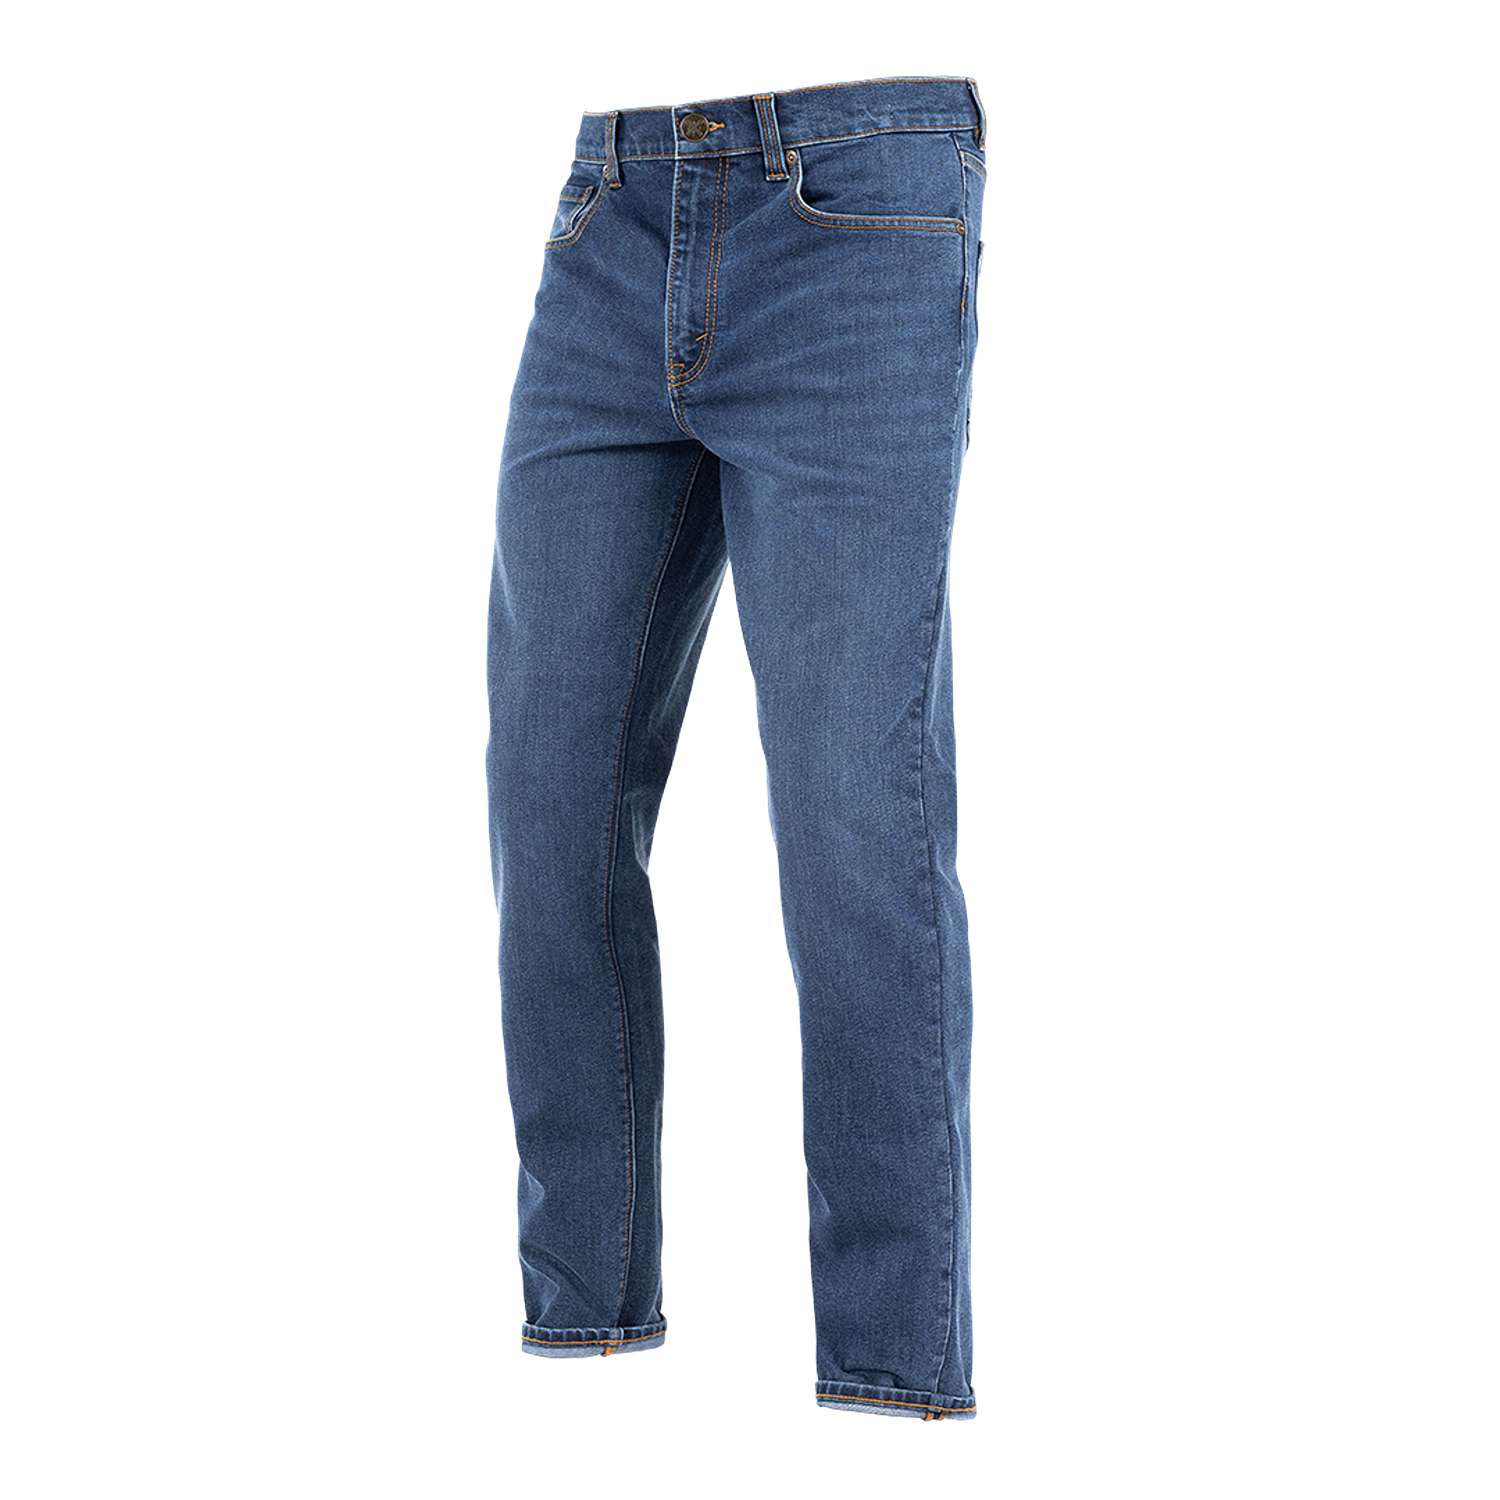 Image of John Doe Classic Tapered Jeans Indigo Taille W36/L34